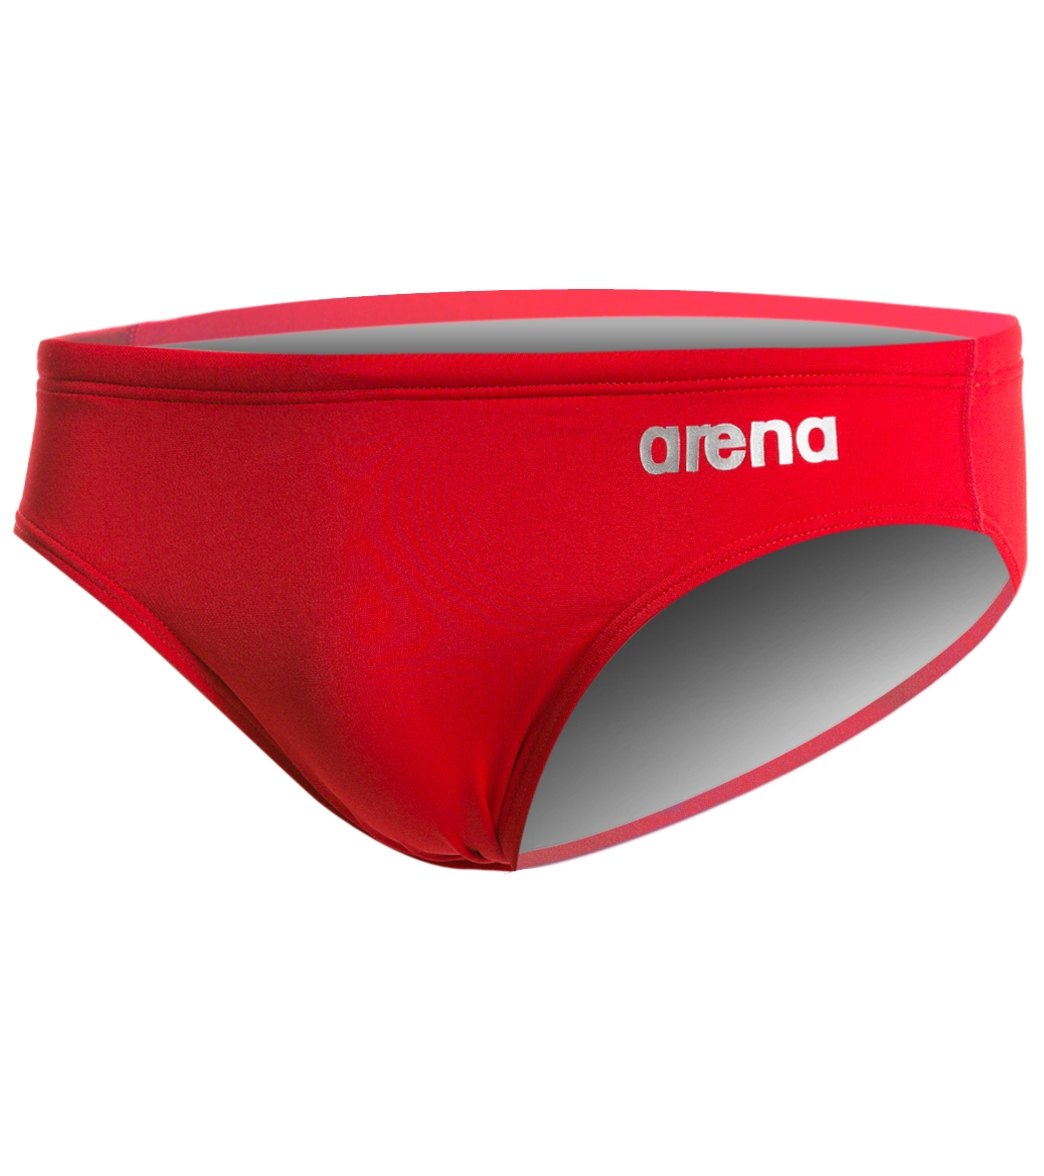 Arena Men's Skys Brief Swimsuit at SwimOutlet.com